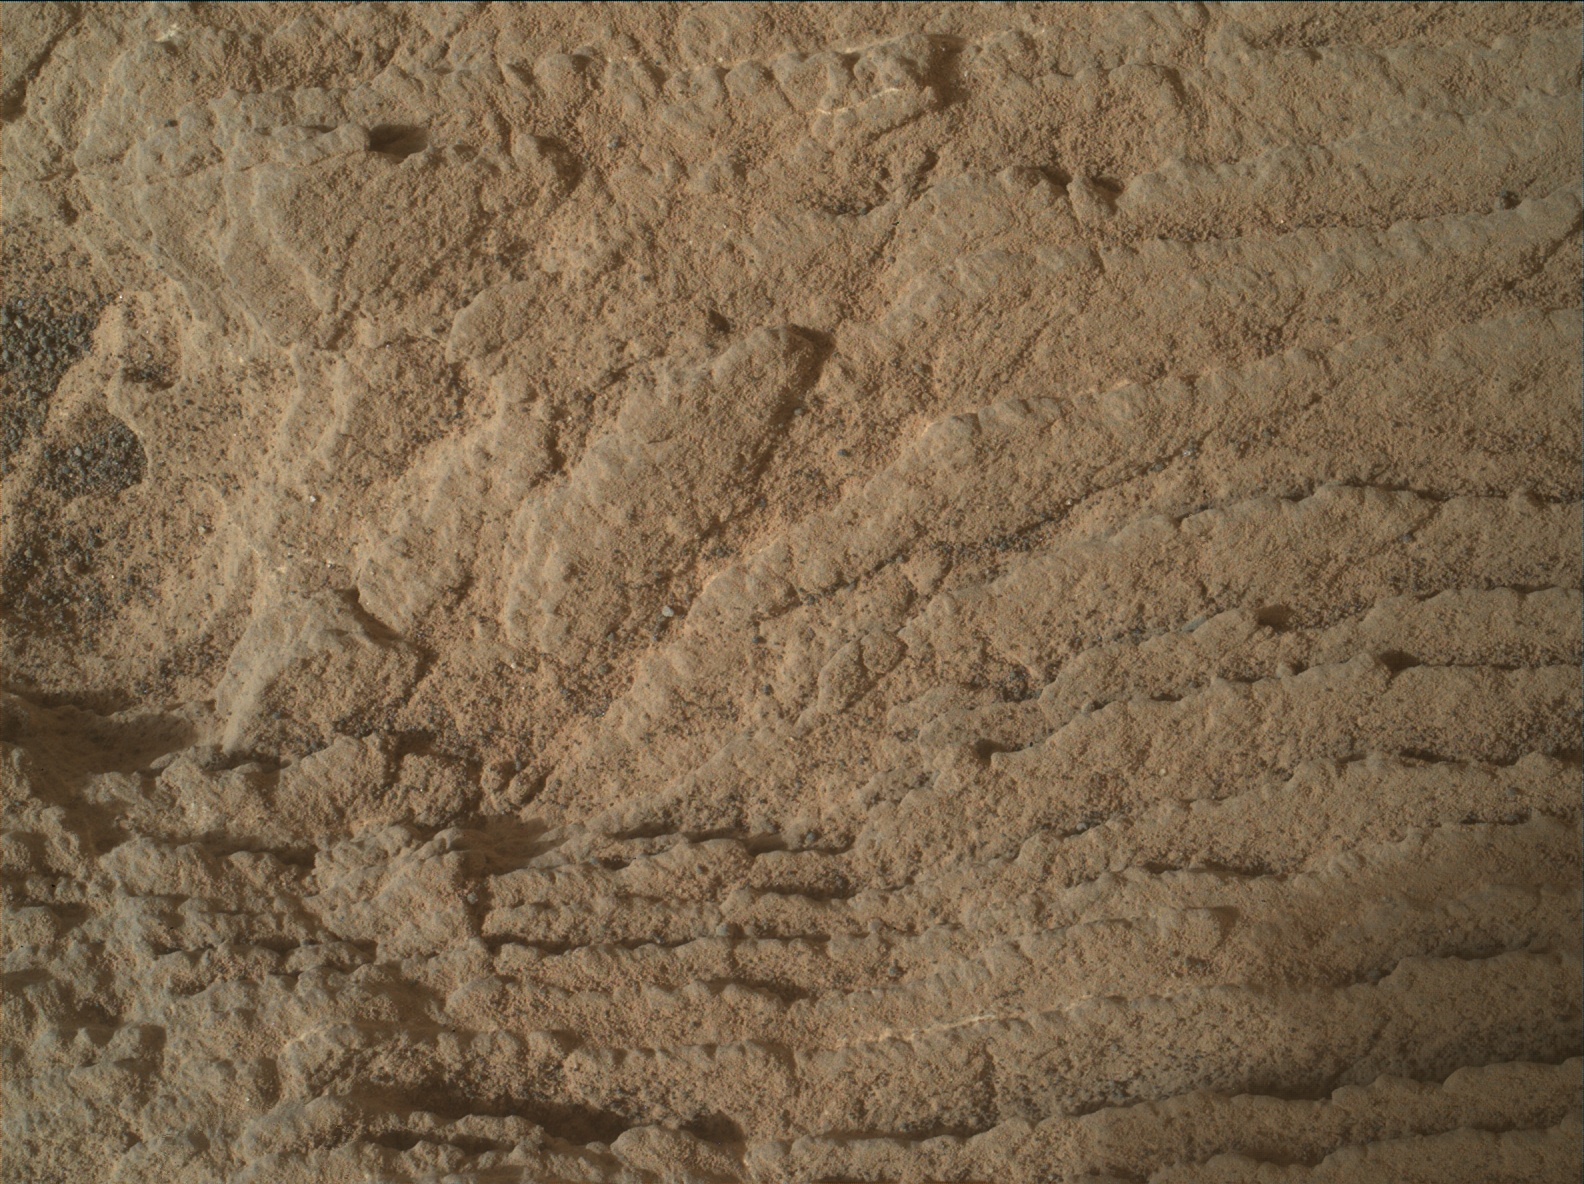 Nasa's Mars rover Curiosity acquired this image using its Mars Hand Lens Imager (MAHLI) on Sol 2444